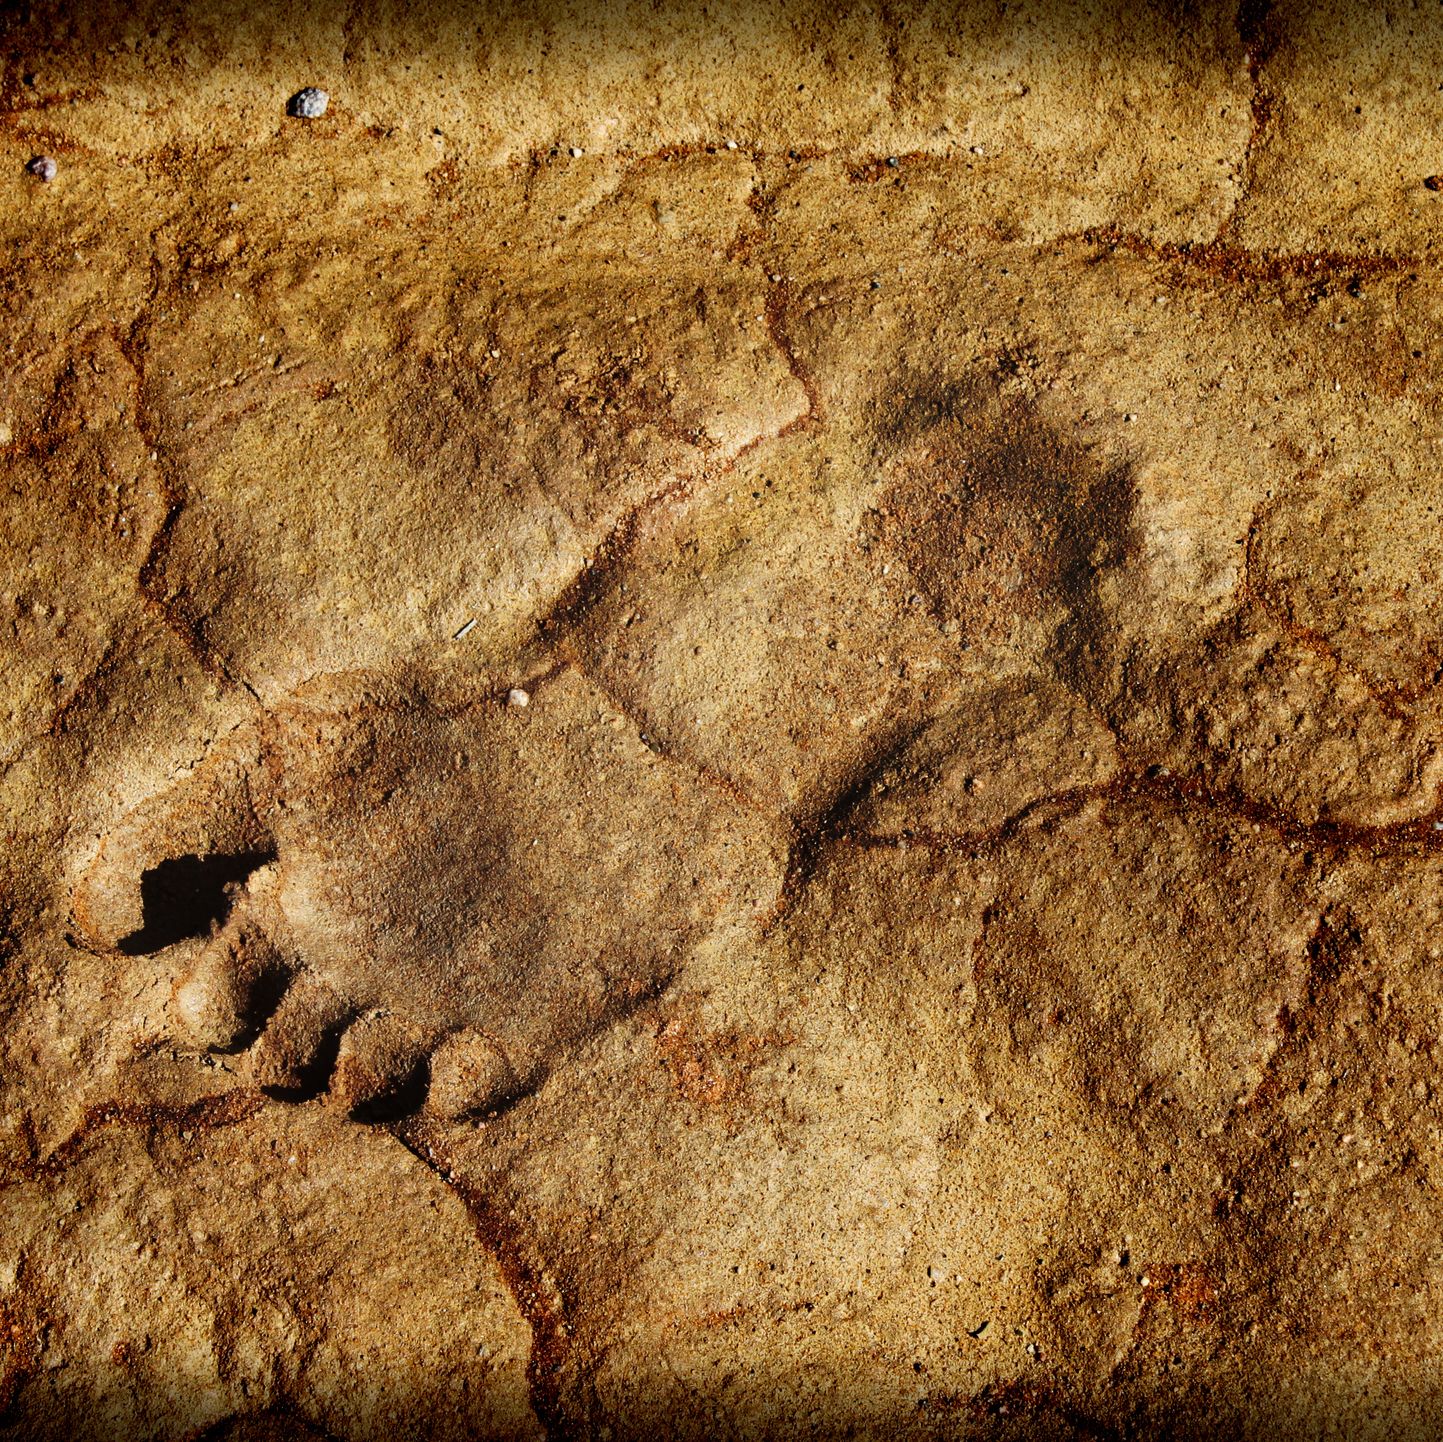 Archaeologists Found 23,000-Year-Old Footprints That Rewrite the Story of Humans in America